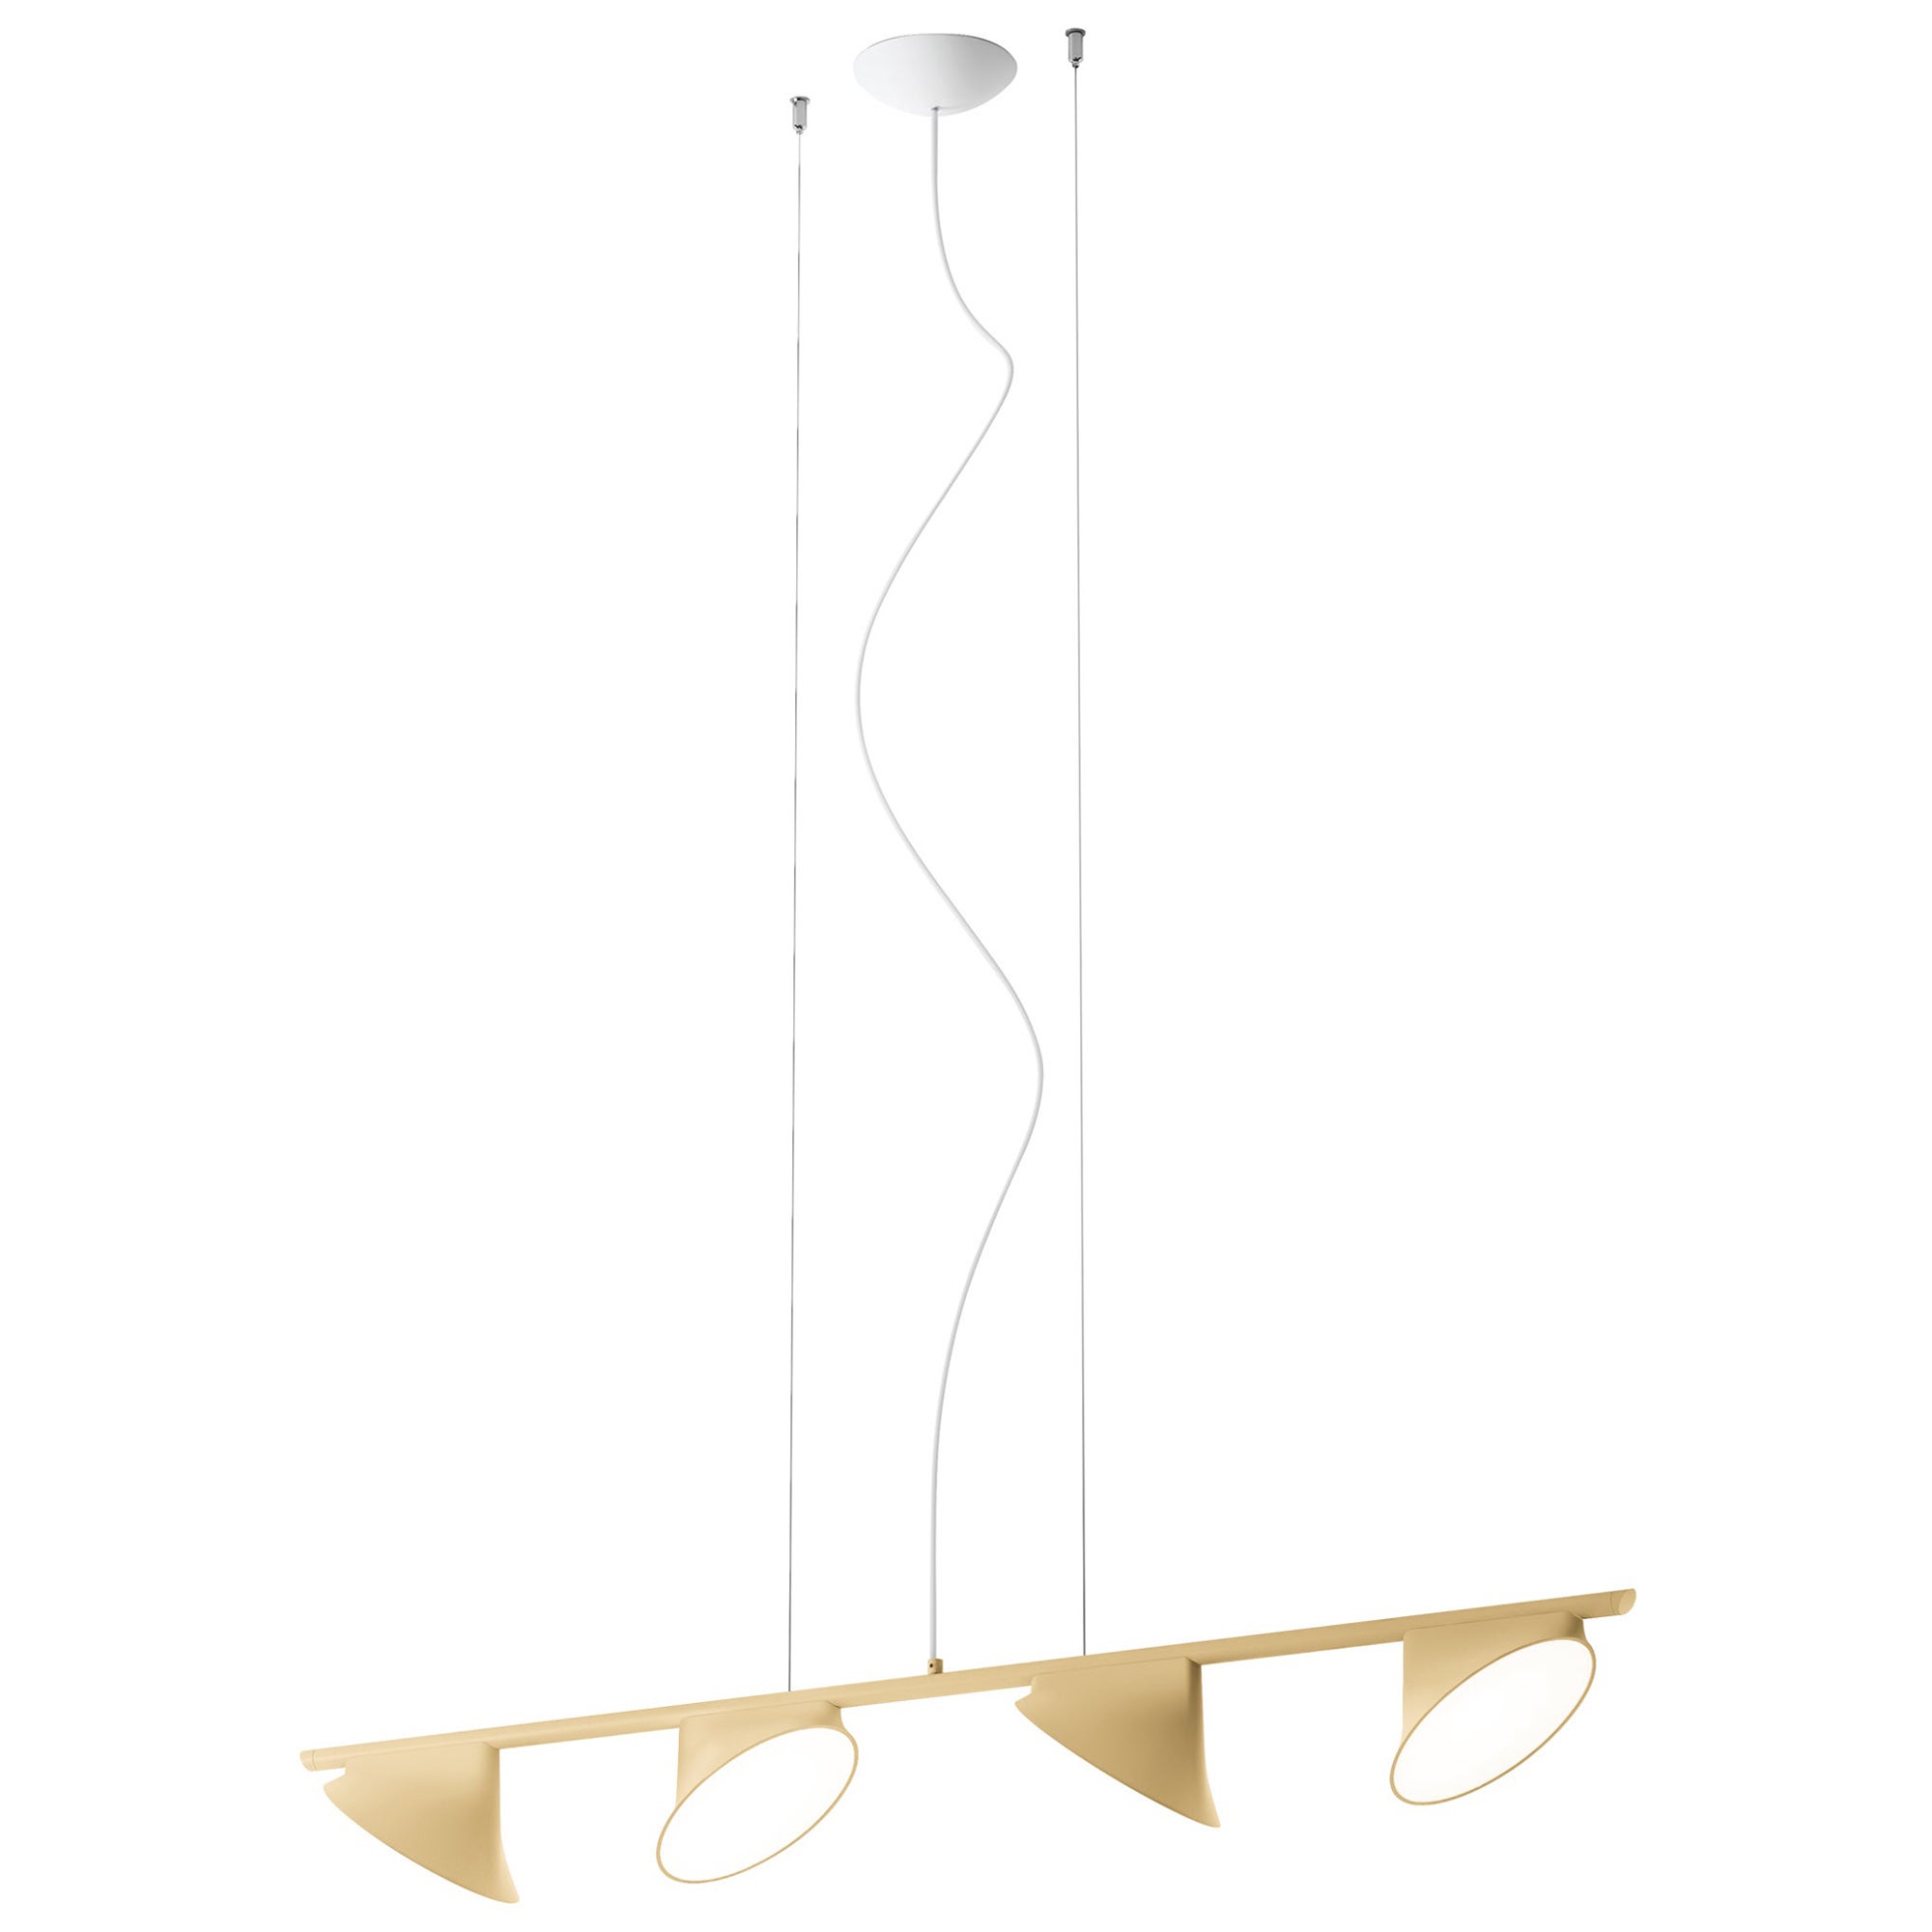 Axolight Orchid 4 Light Suspension Lamp with Aluminum Body in Sand by Rainer Mutsch